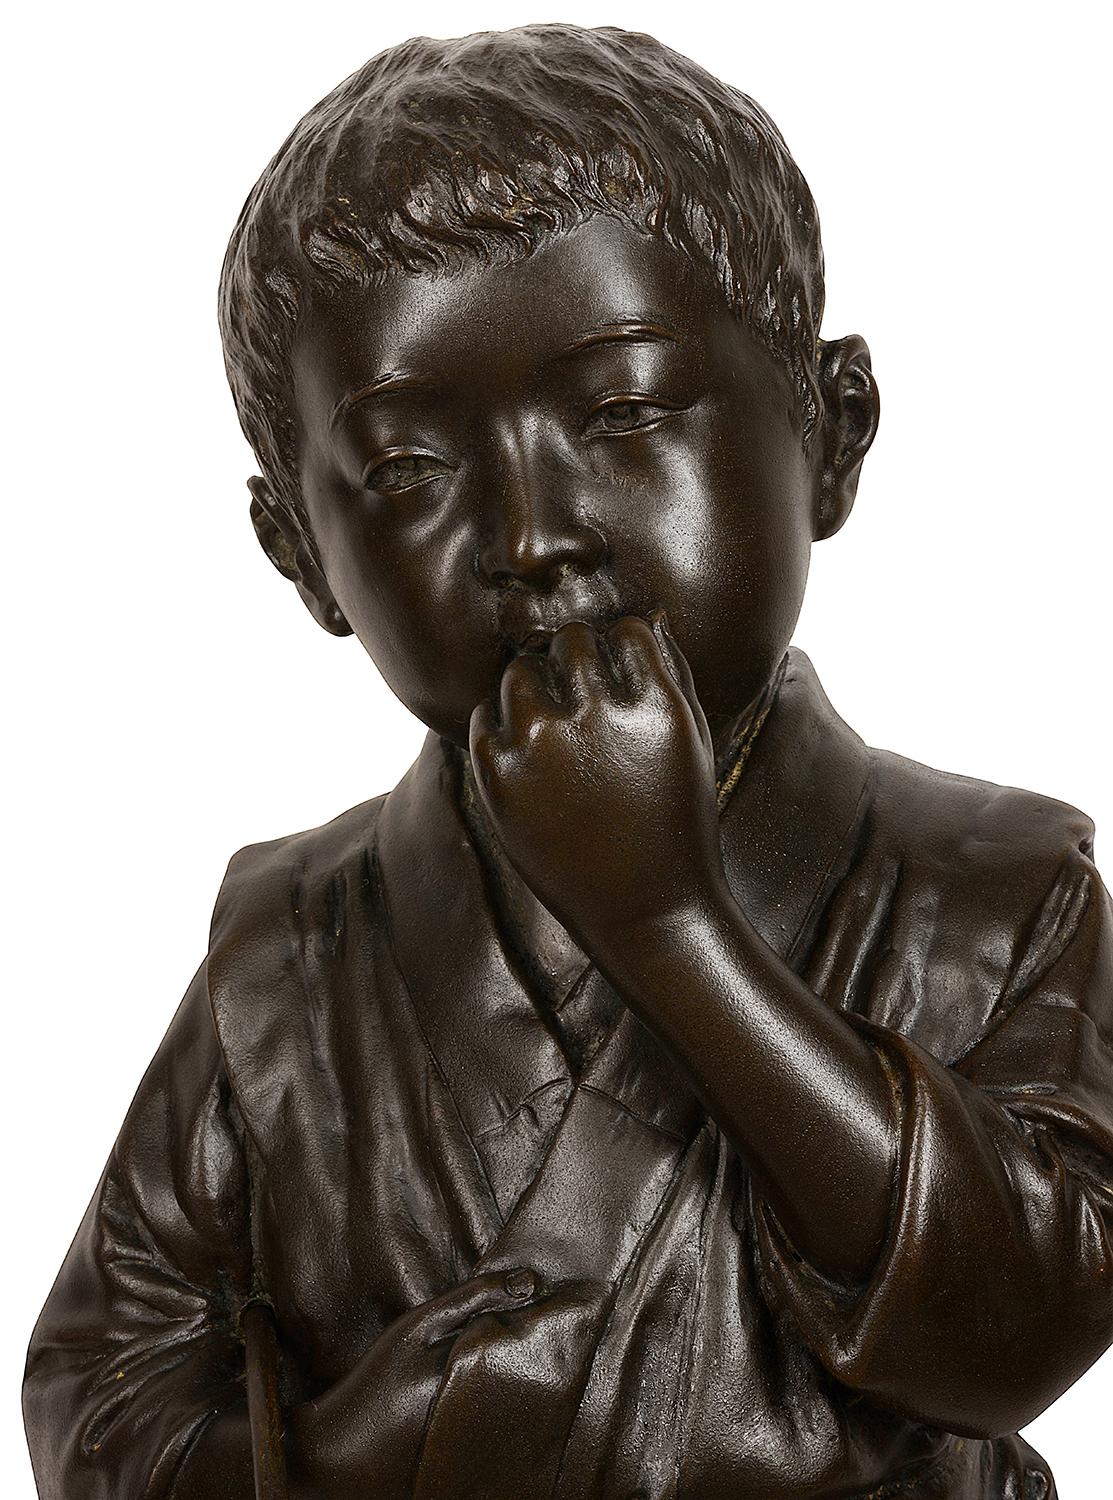 A large very good quality late 19th century (Meiji period 1868-1912) Japanese patinated bronze statue of a young child in traditional dress holding a play hoop. Measures: 60cm (24